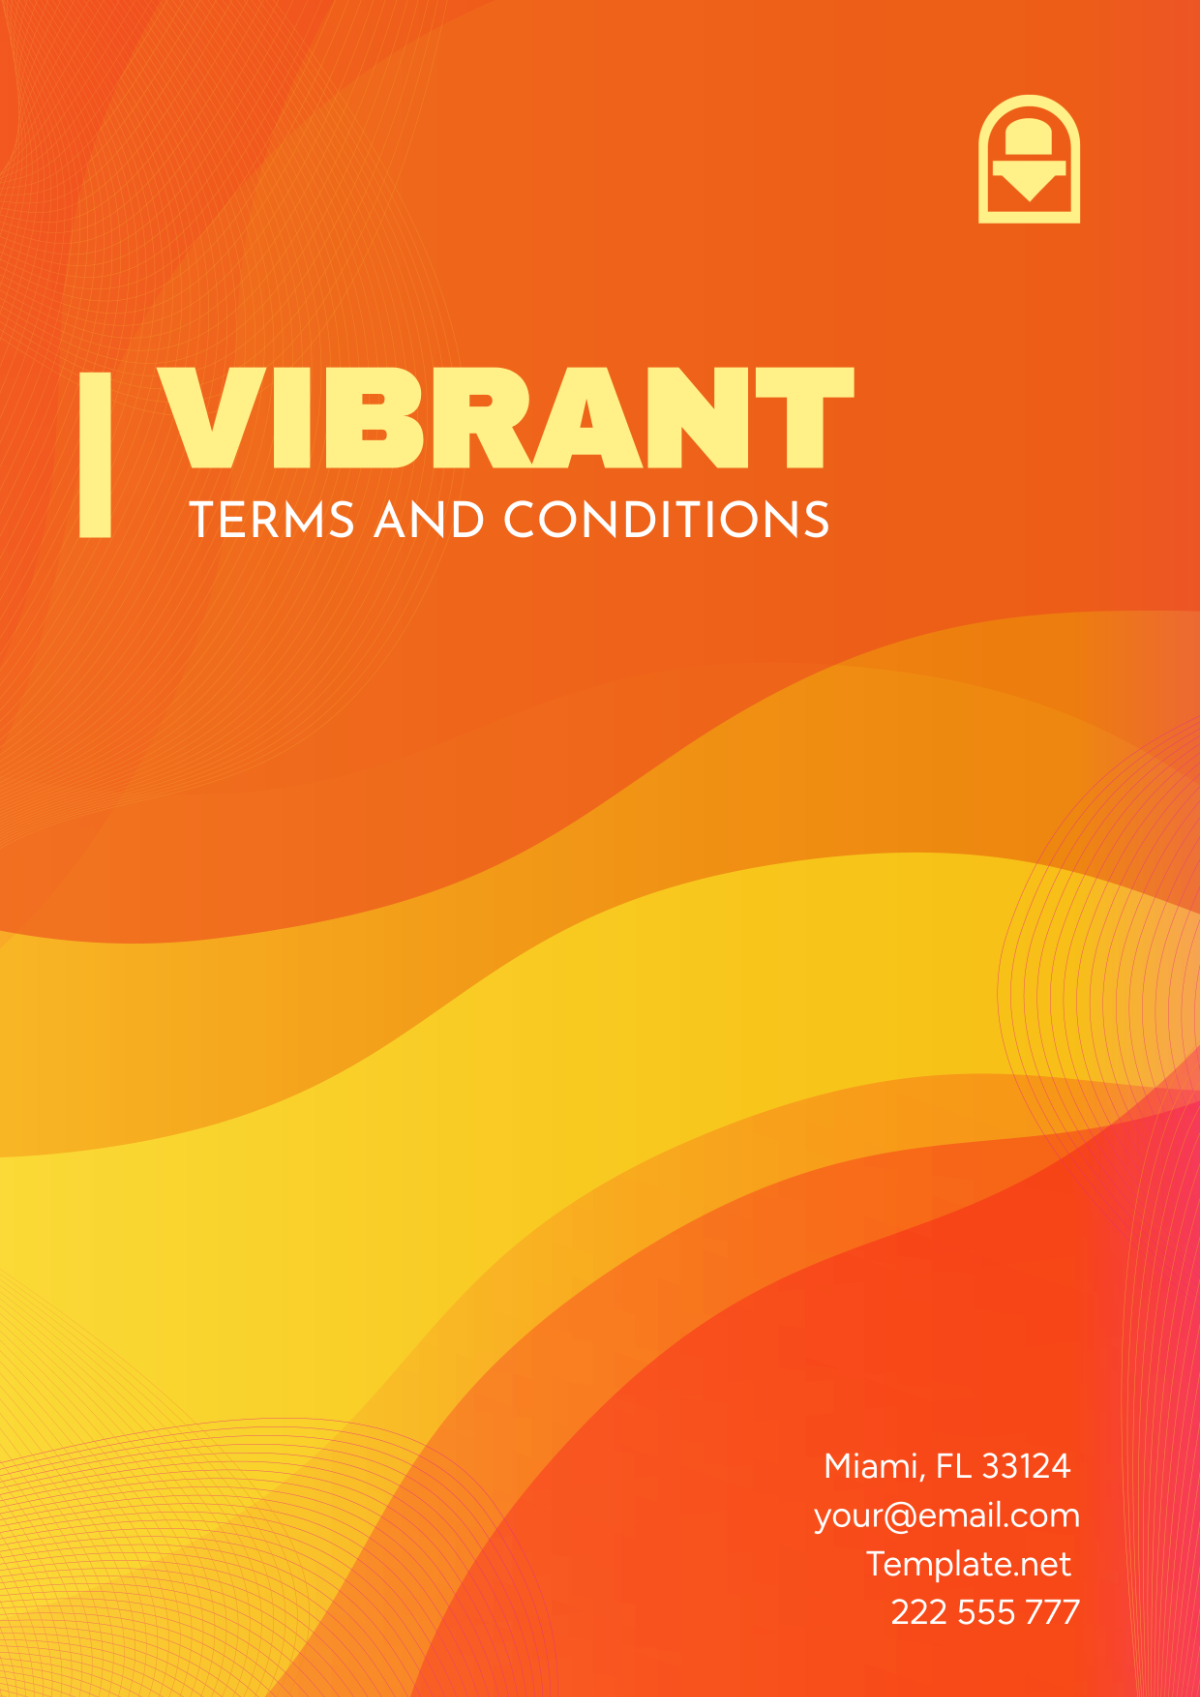 Vibrant Terms and Conditions Cover Page Template